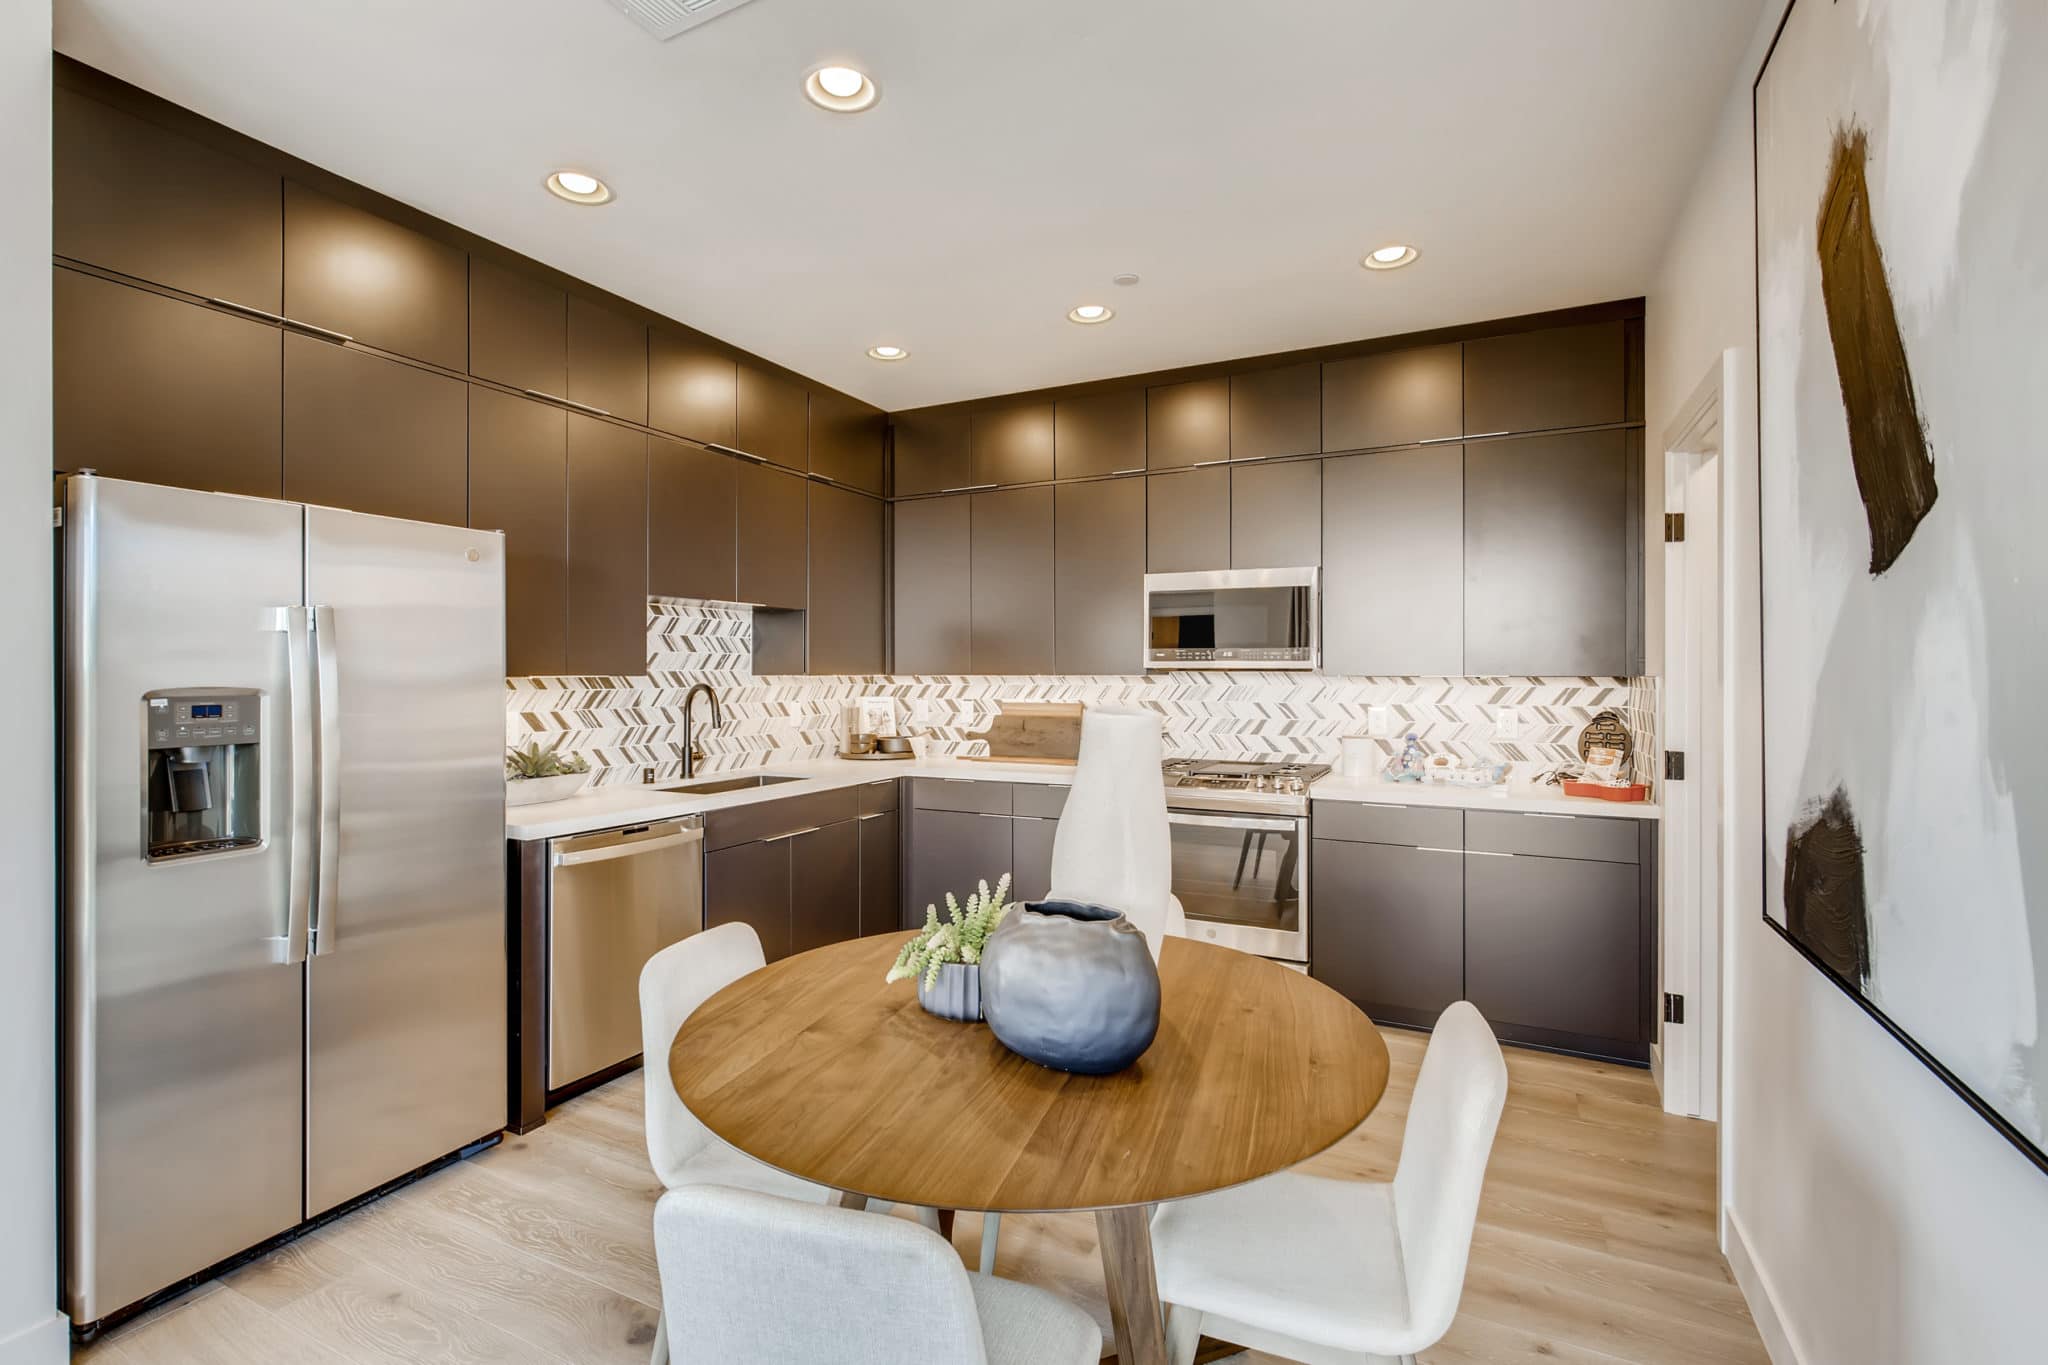 Kitchen of Onyx Plan 2 at Obsidian by Woodside